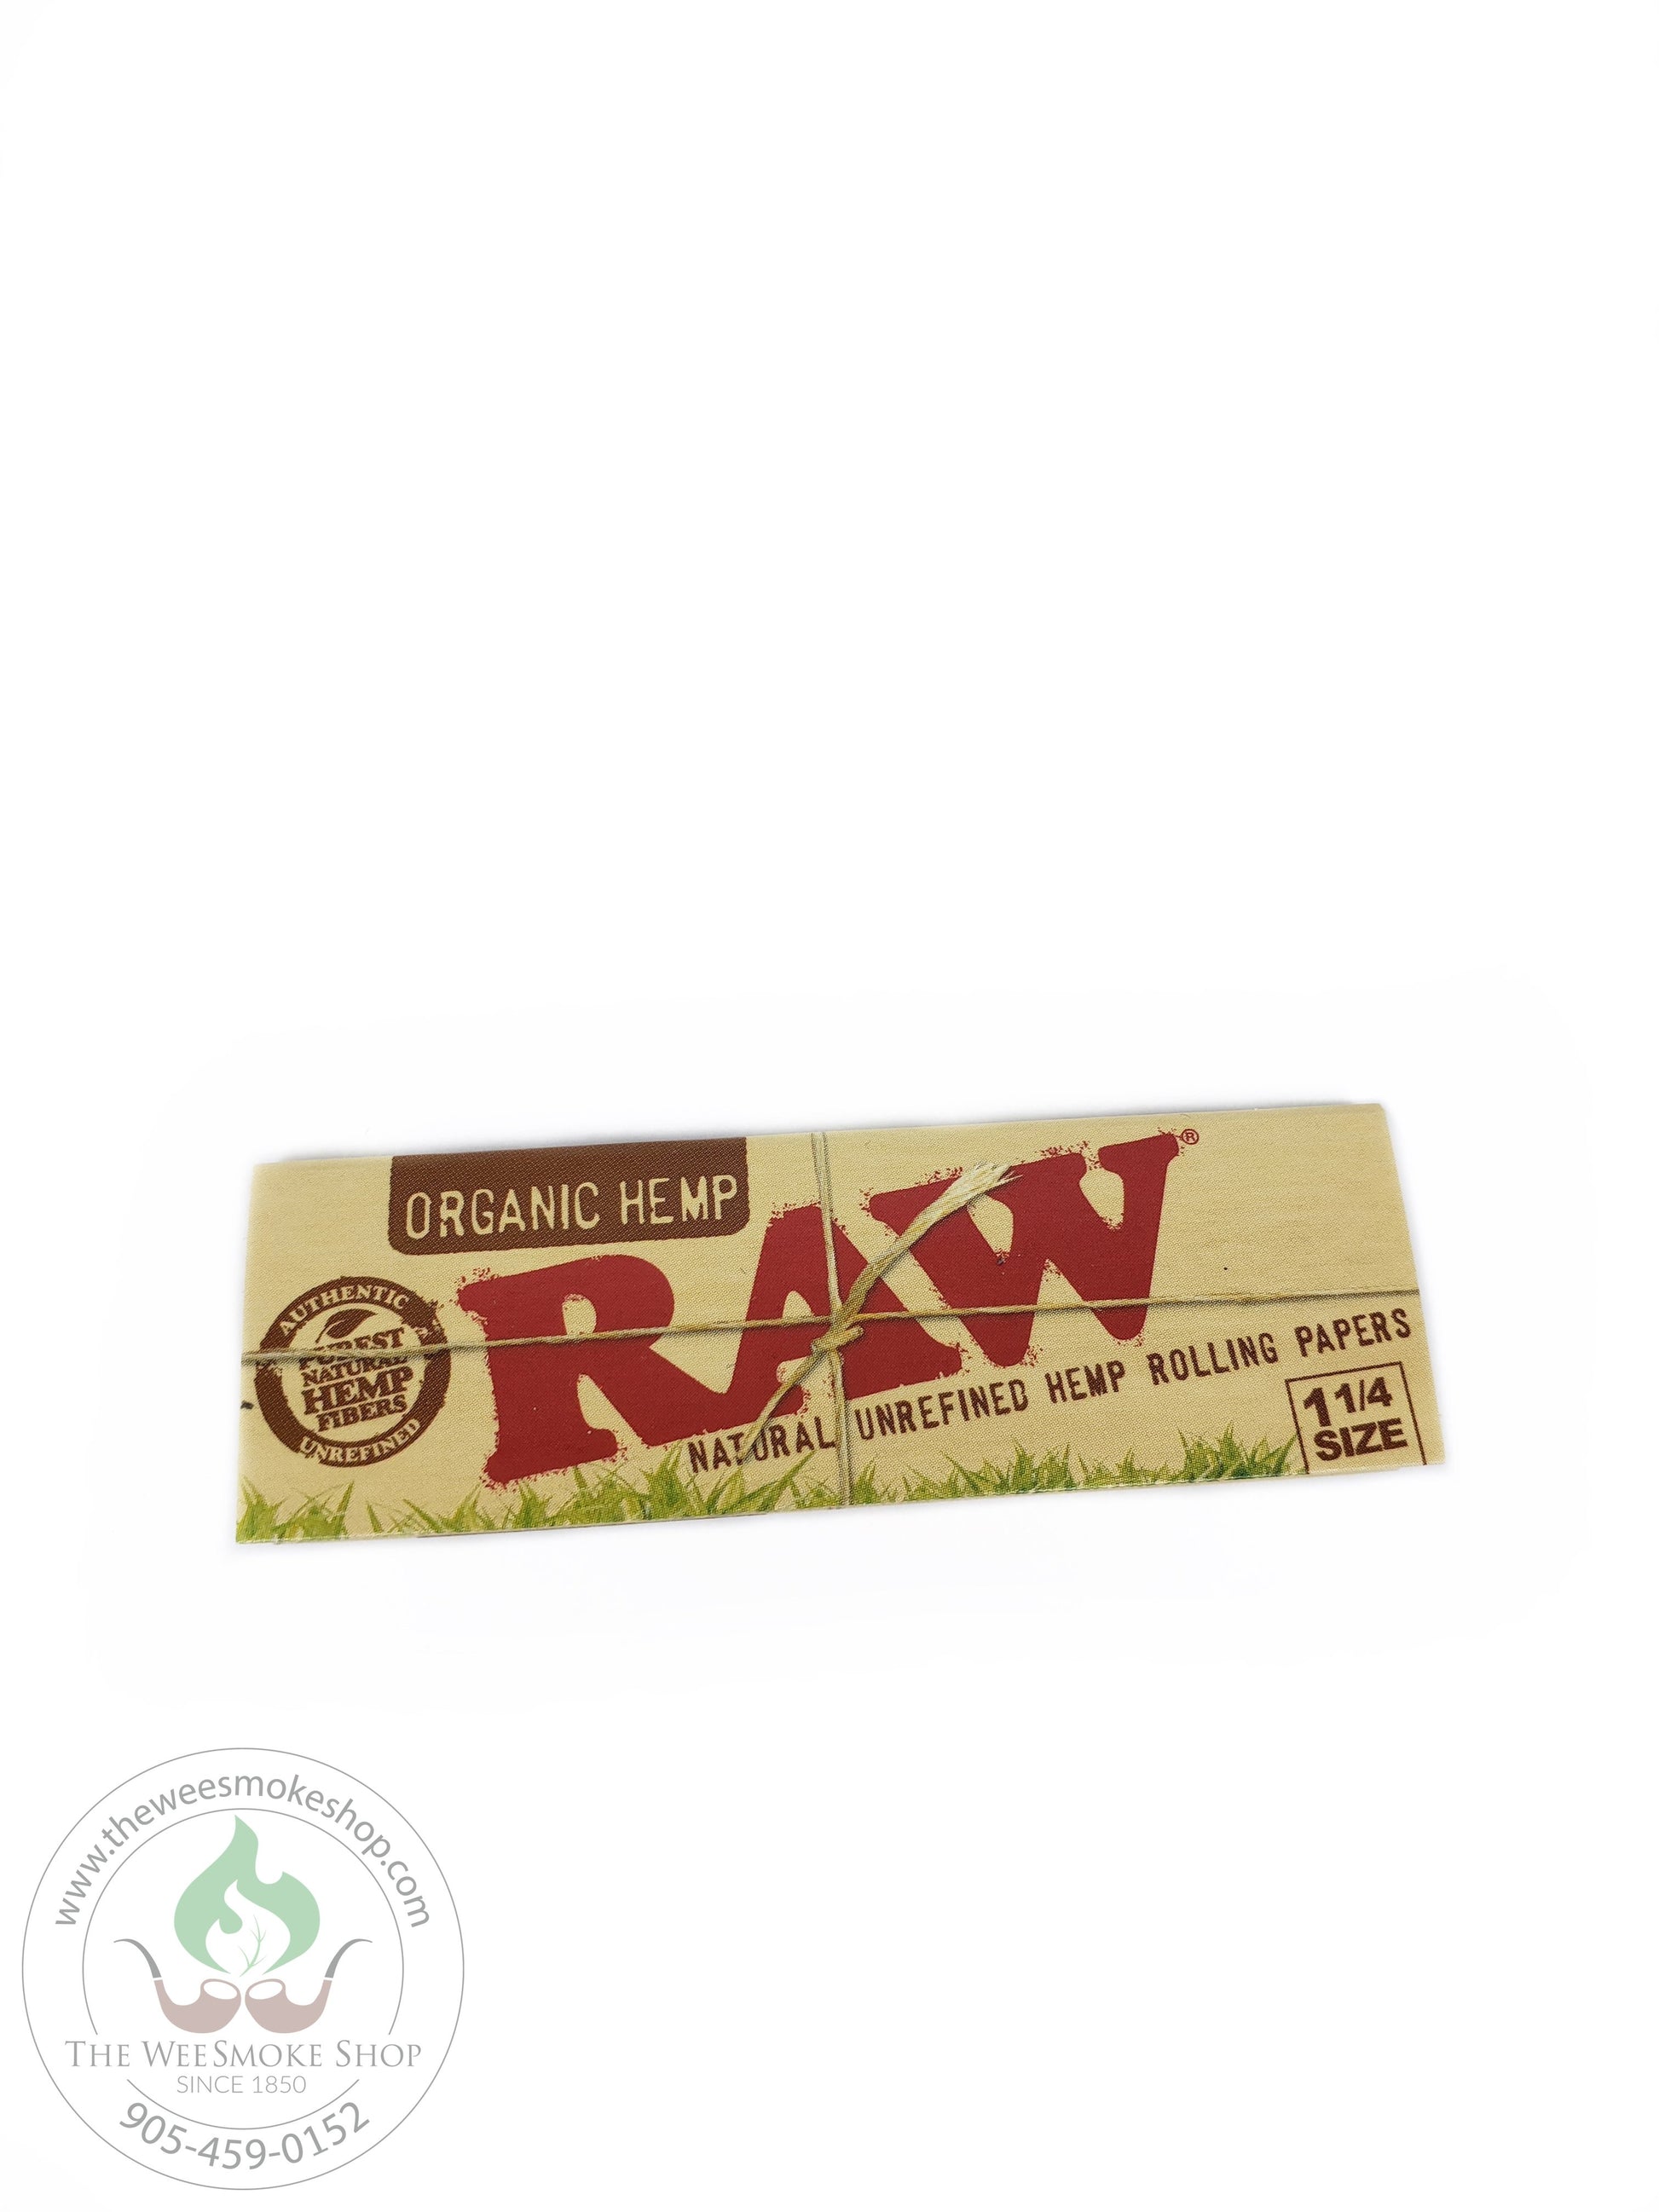 RAW Organic Hemp Rolling Papers-rolling papers. 1 1/4 size.